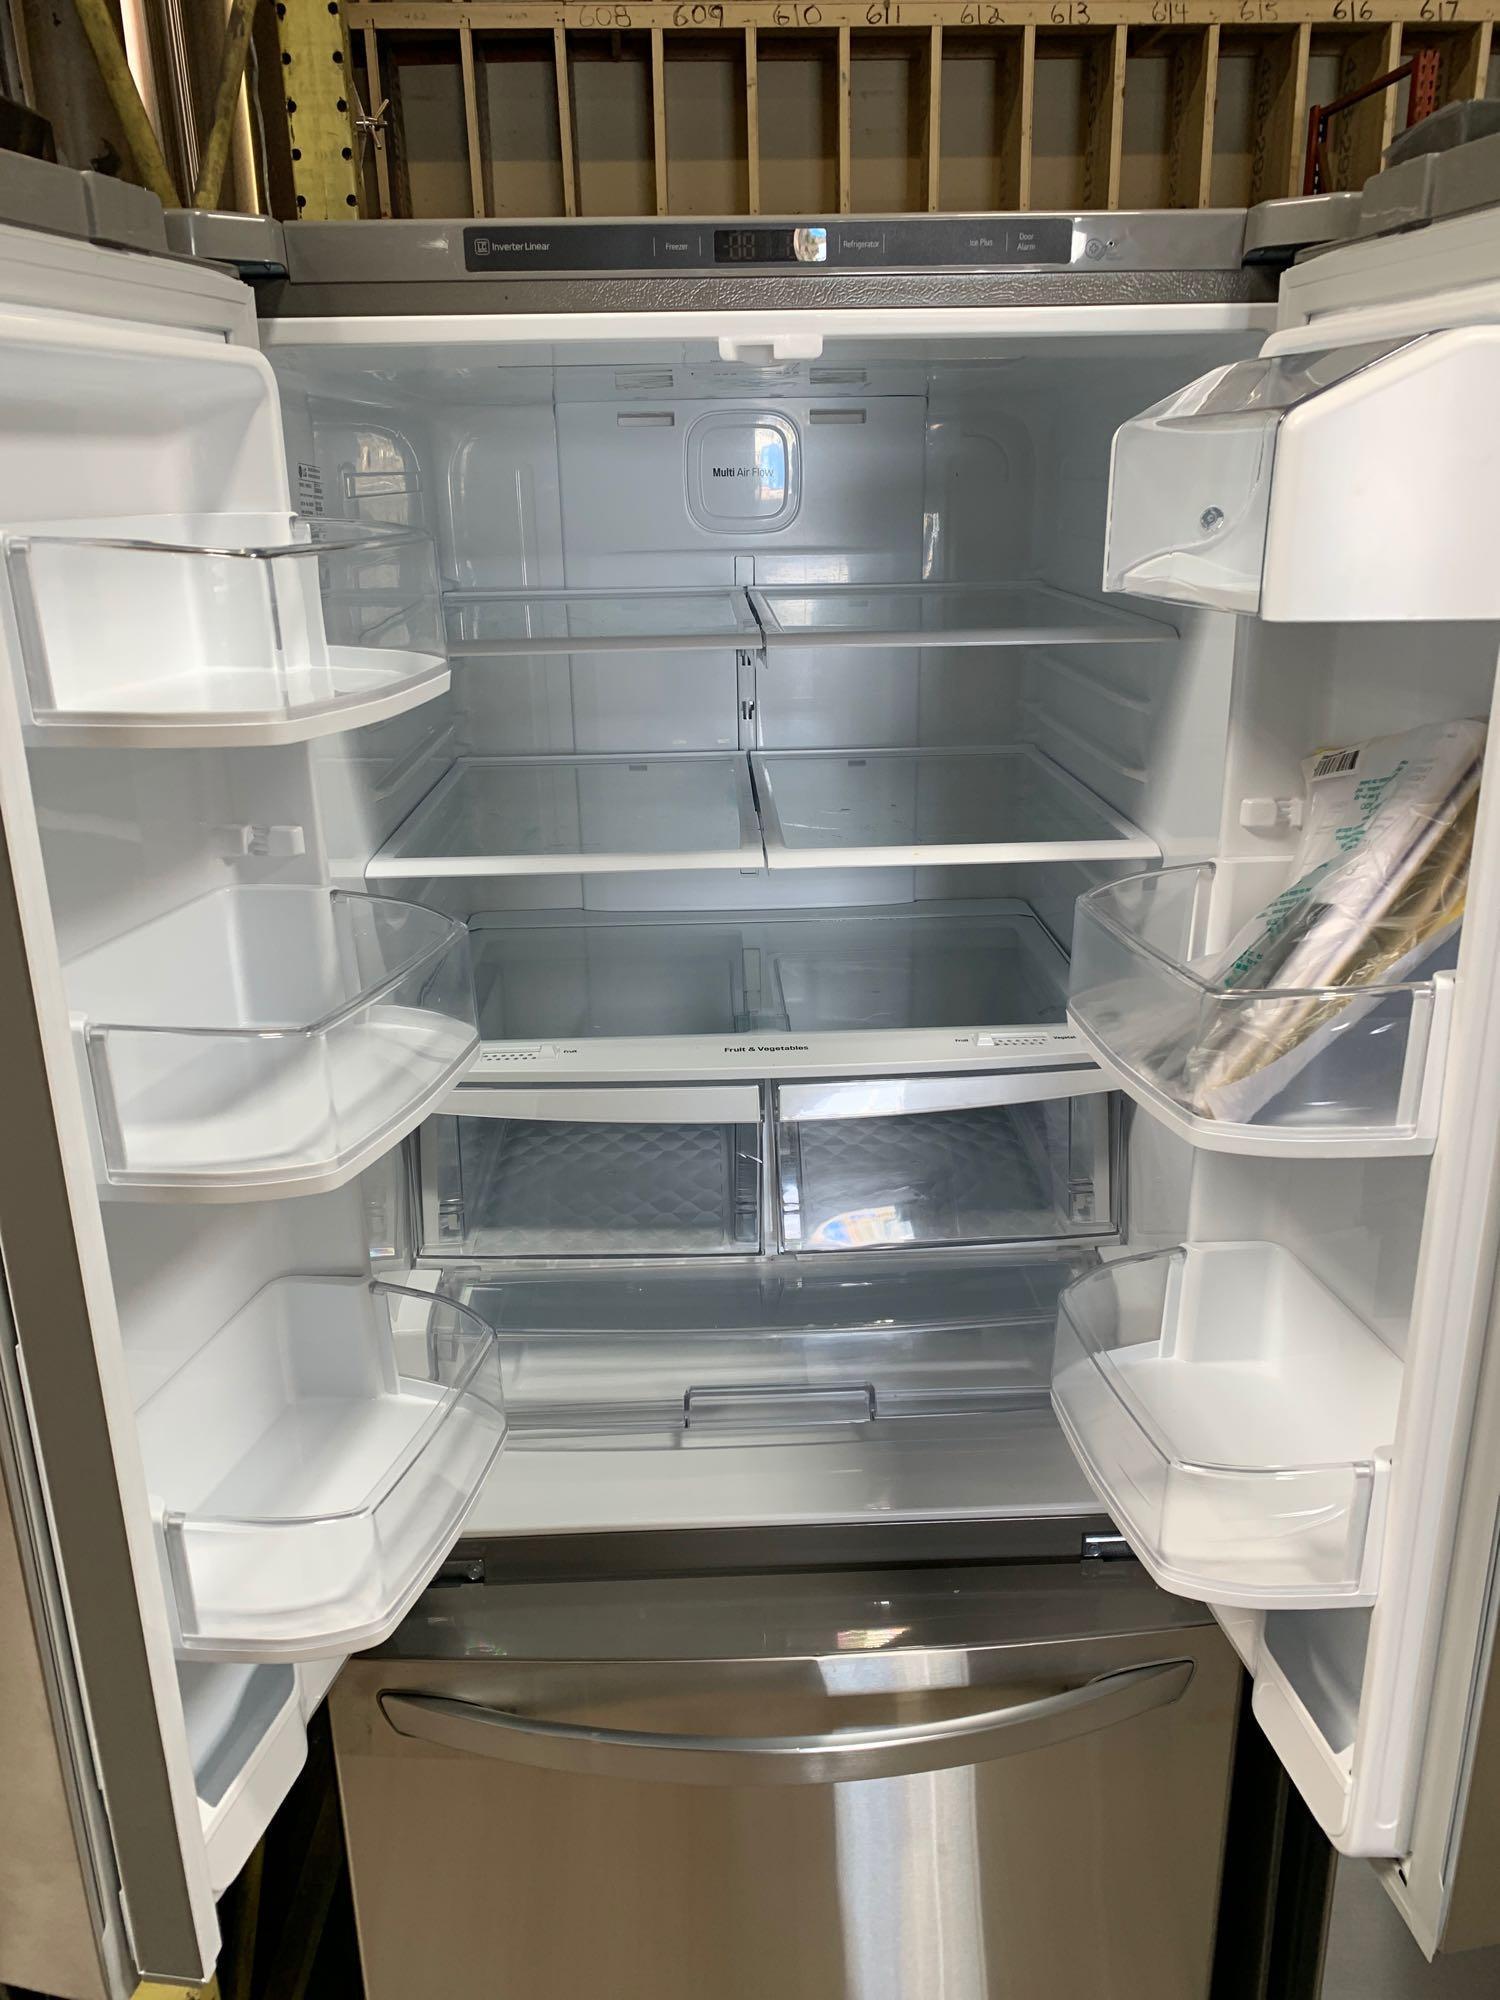 LG 21.8 cu. ft. French Door Stainless Steel Refrigerator*GETS COLD**PREVIOUSLY INSTALLED*